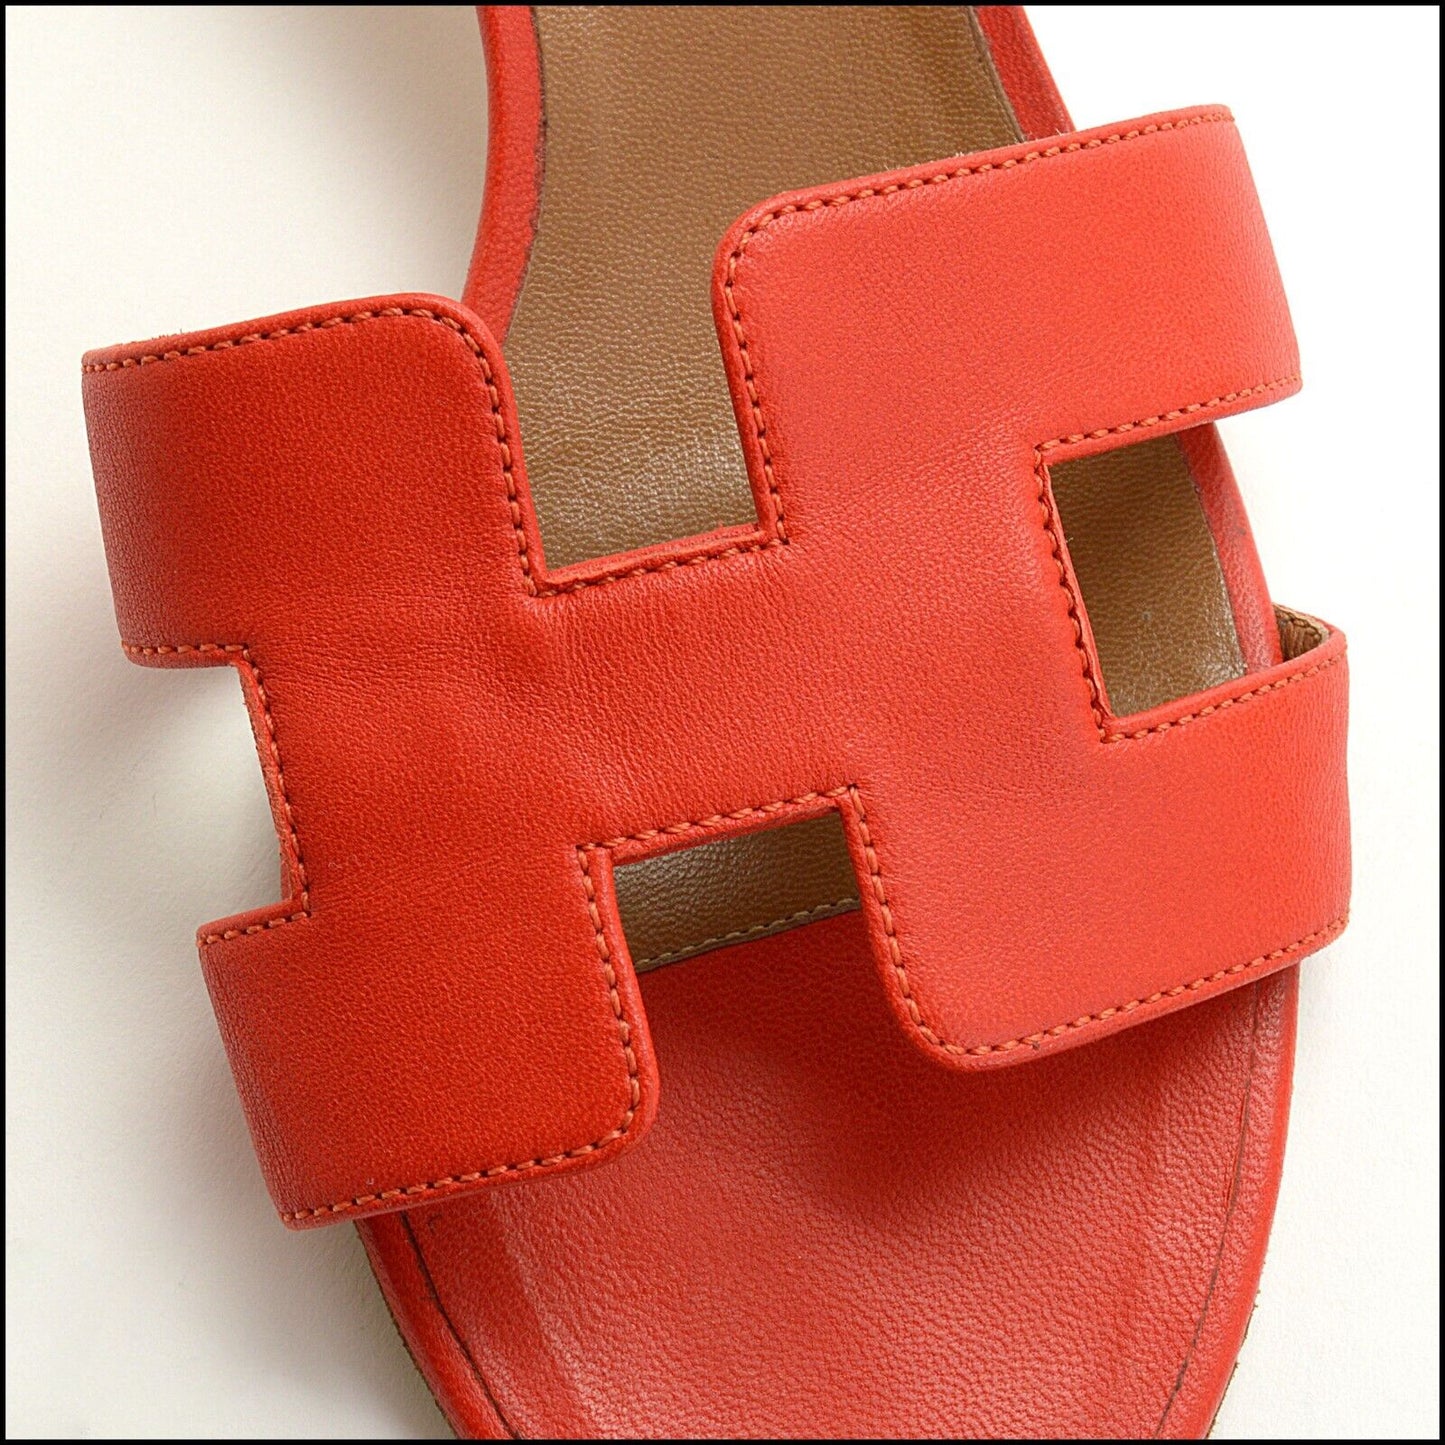 RDC13832 Authentic HERMES Red / Orange Leather Oasis Sandals Size 8